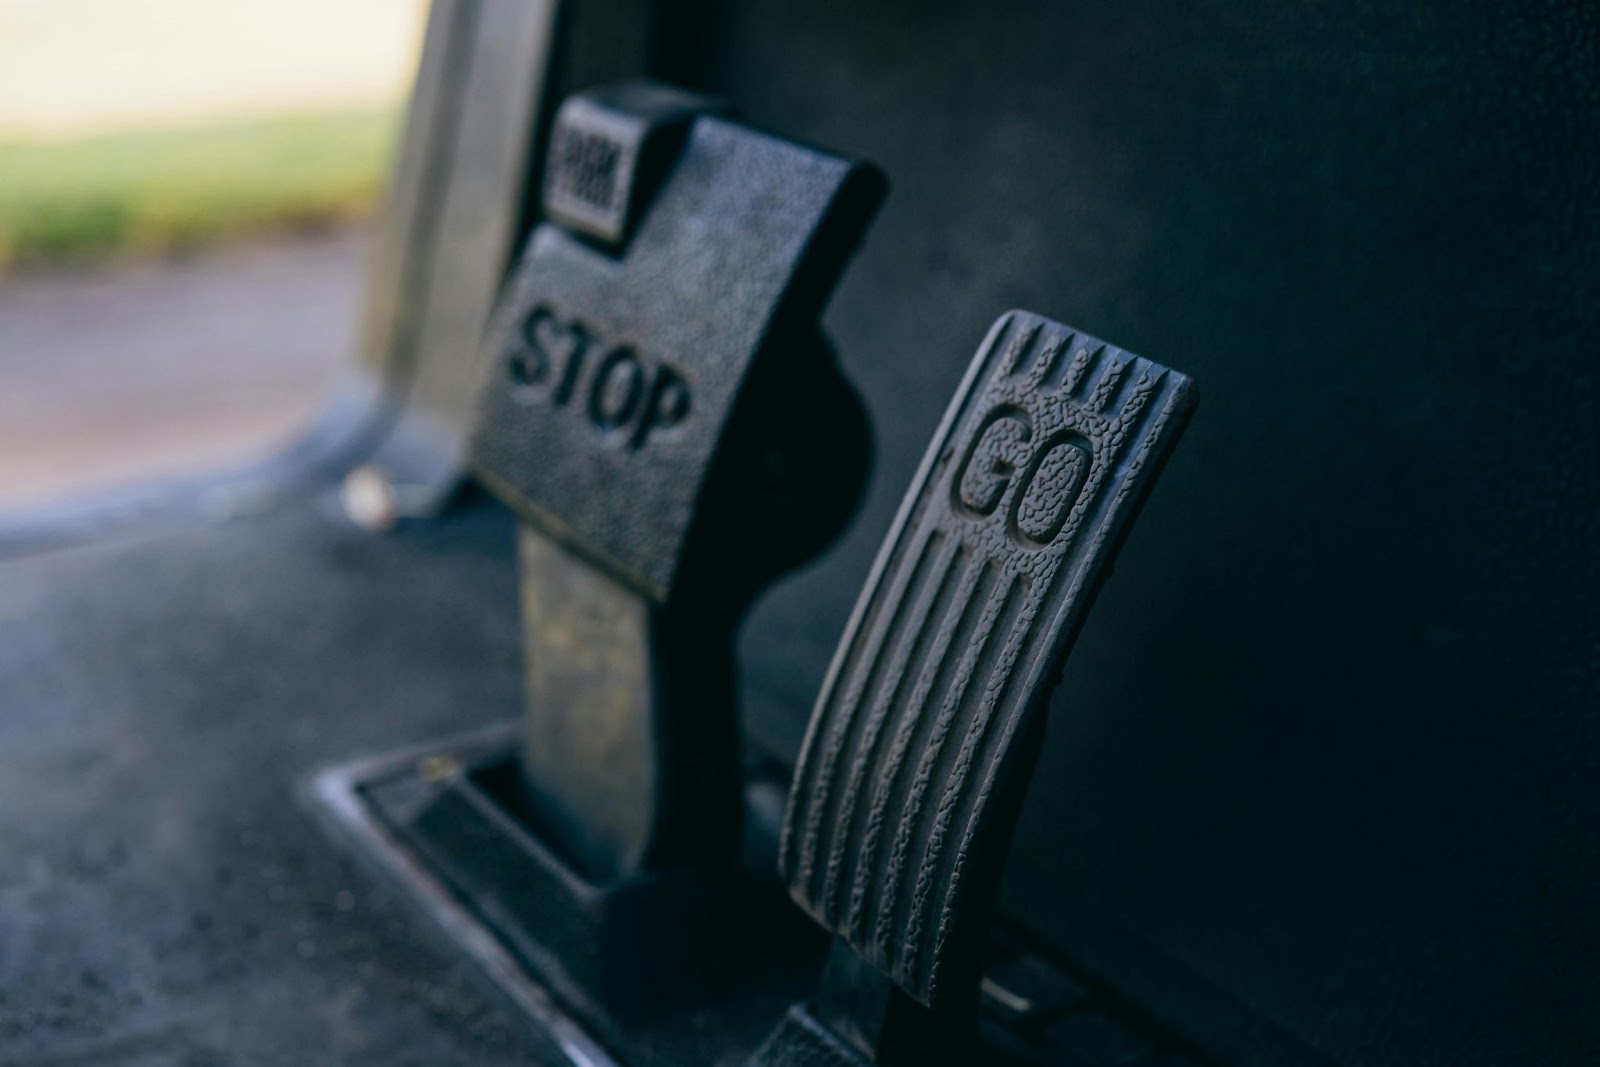 A close-up picture of a "Stop" and "Go" floor pedal on a forklift